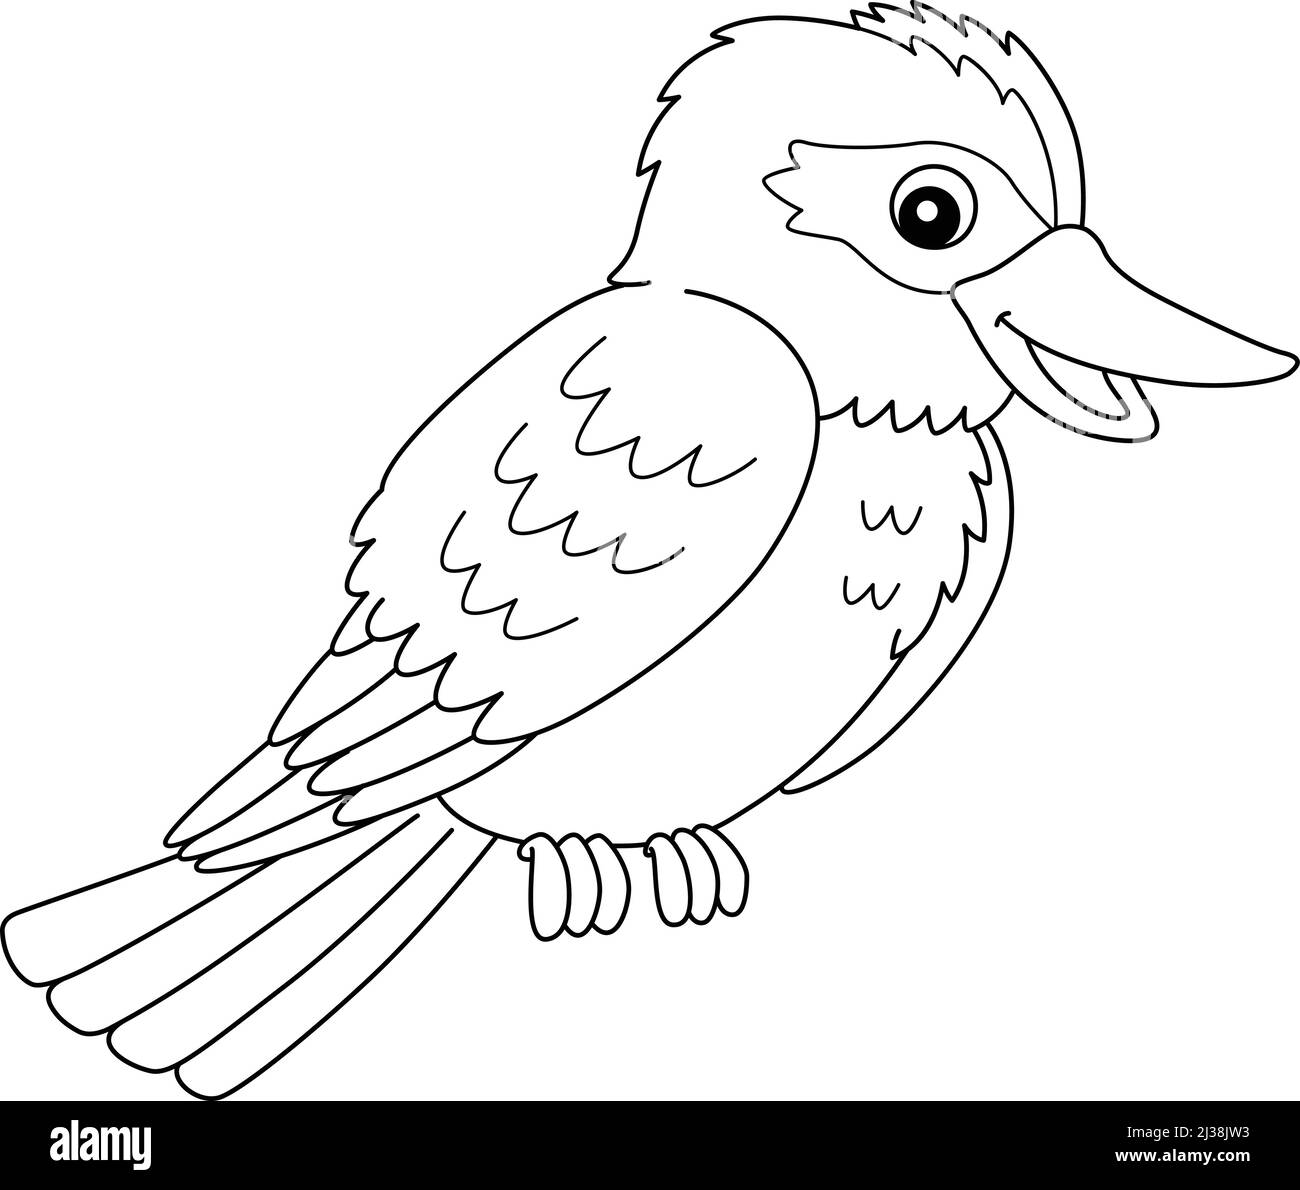 Kookaburra Animal Coloring Page Isolated for Kids Stock Vector